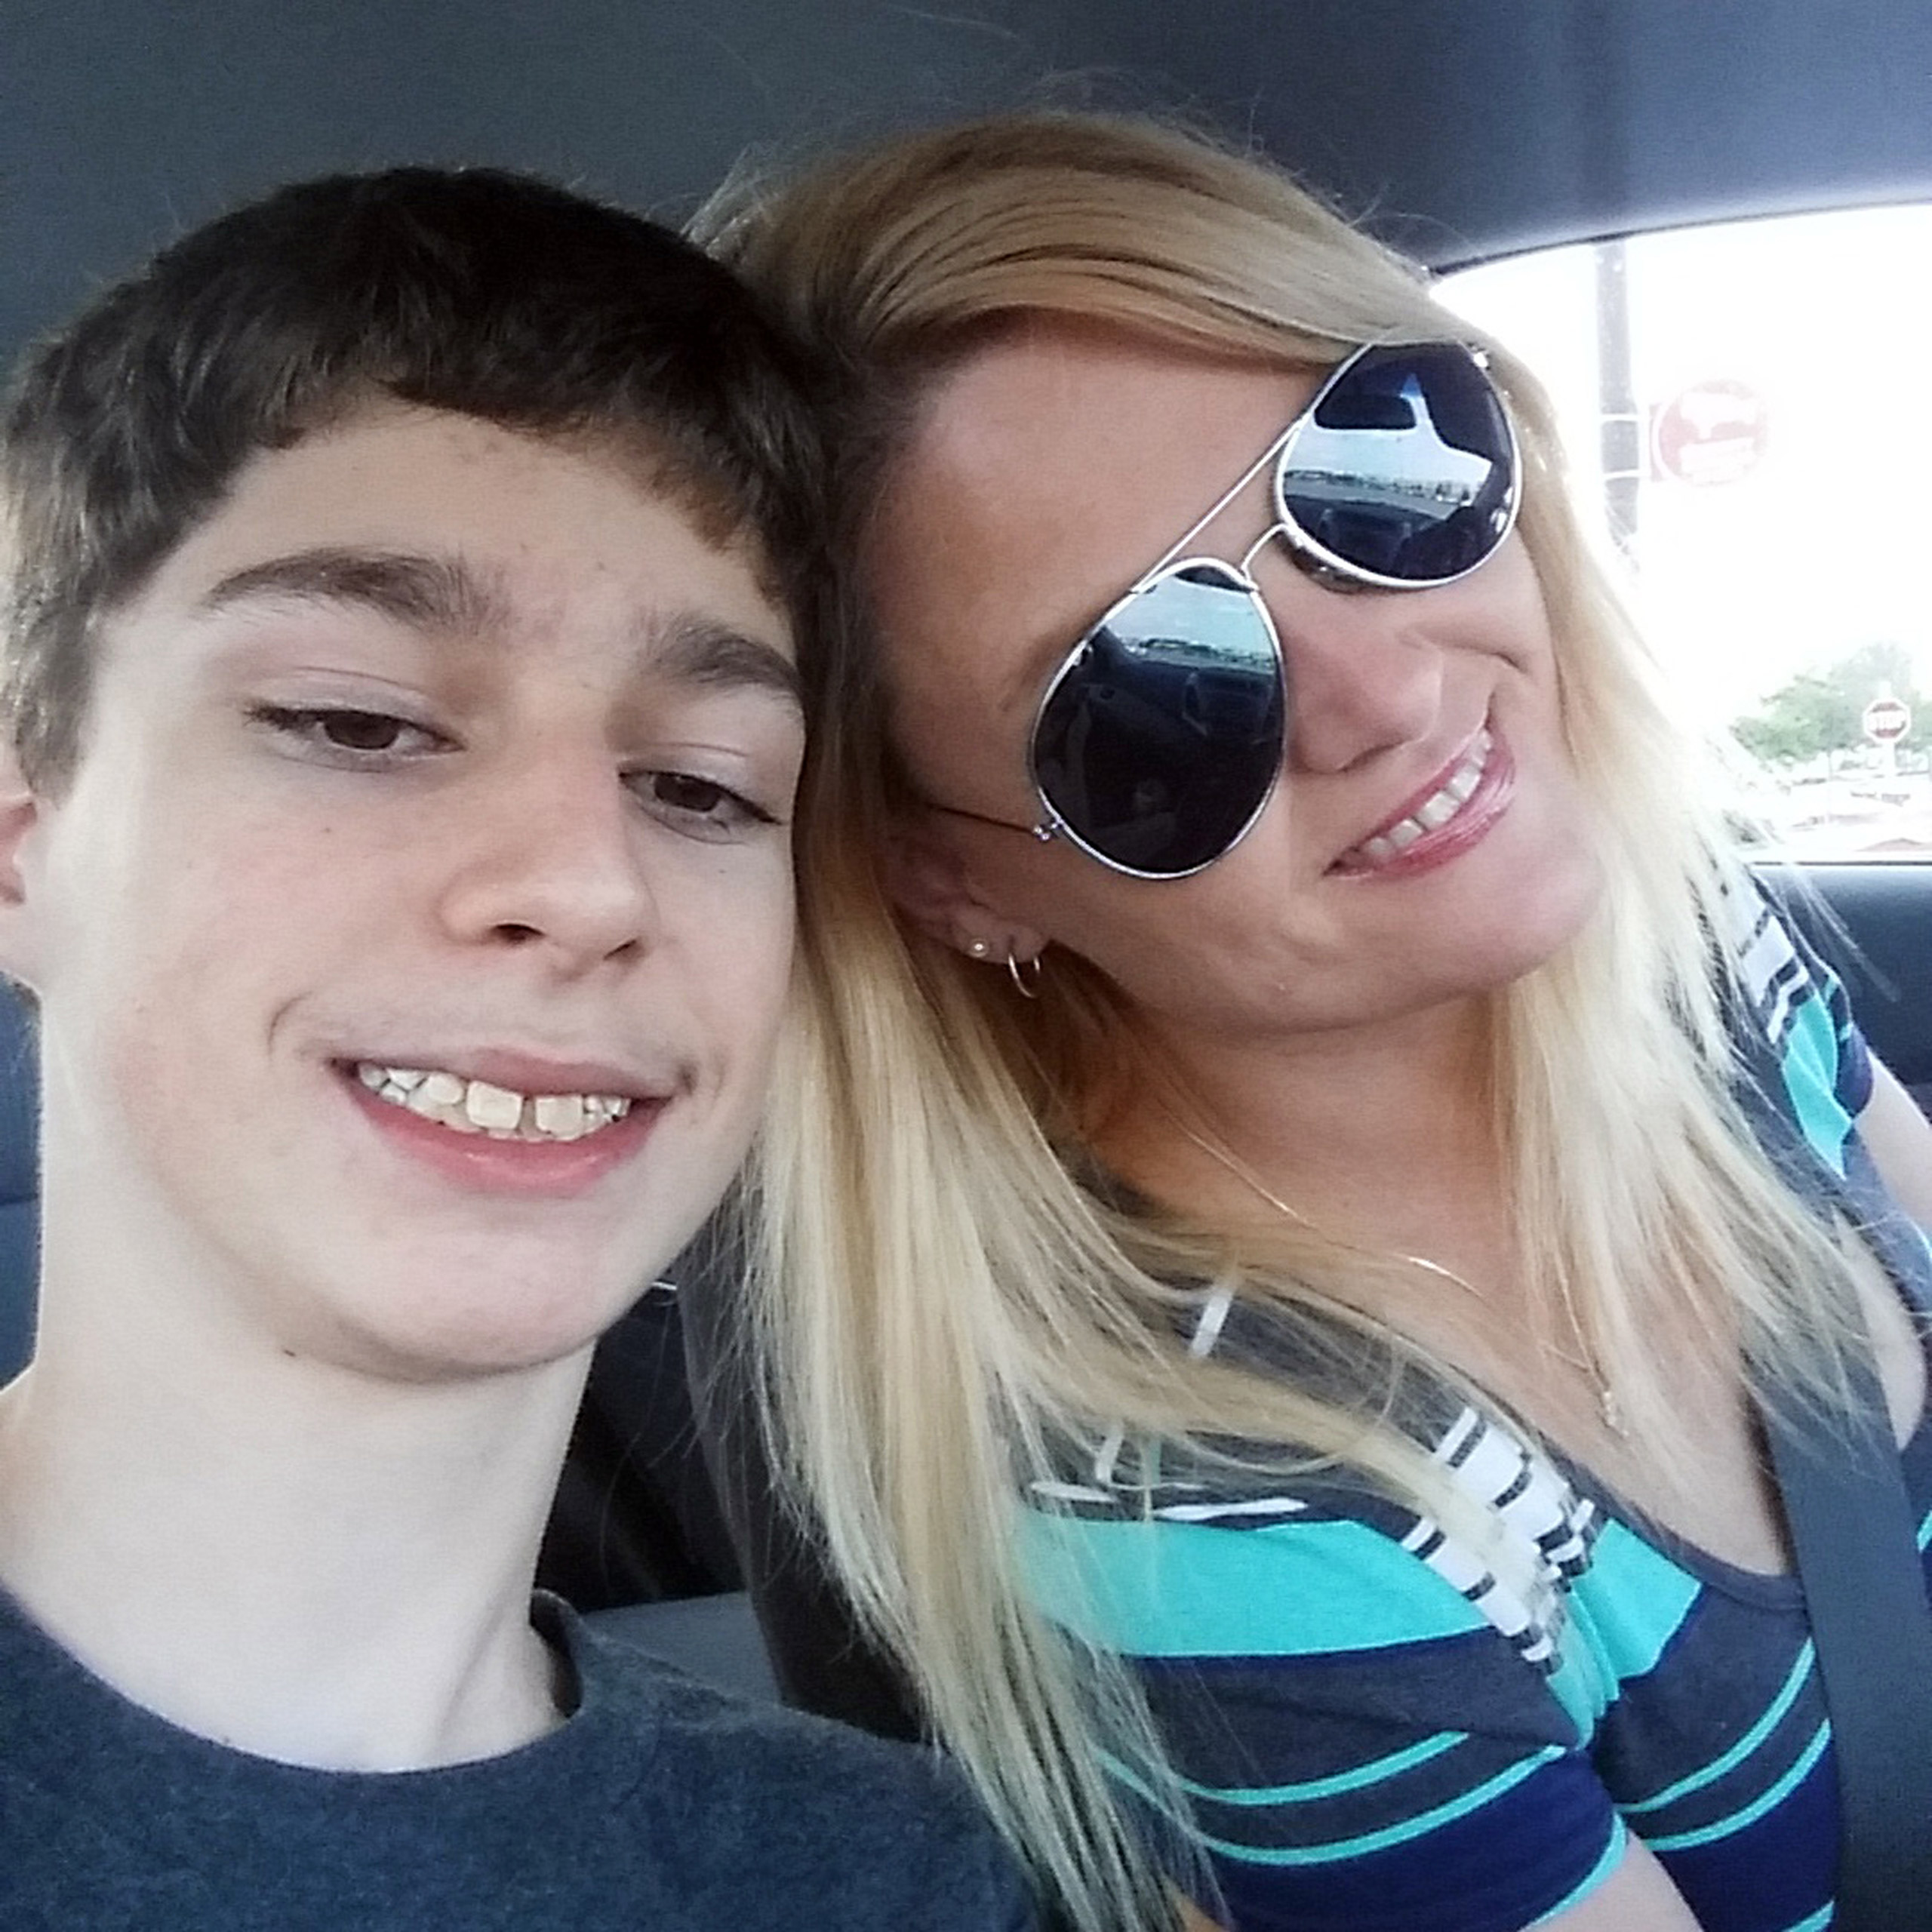 In this undated selfie, Alex Hoover, left, poses for a photo with his mother, Rene. Alex Hoover, an Alabama teen with a terminal heart condition has not returned to school after a spate of hospitalizations because of what his mother says is a dispute with school officials about how he might die. (Rene Hoover via AP)